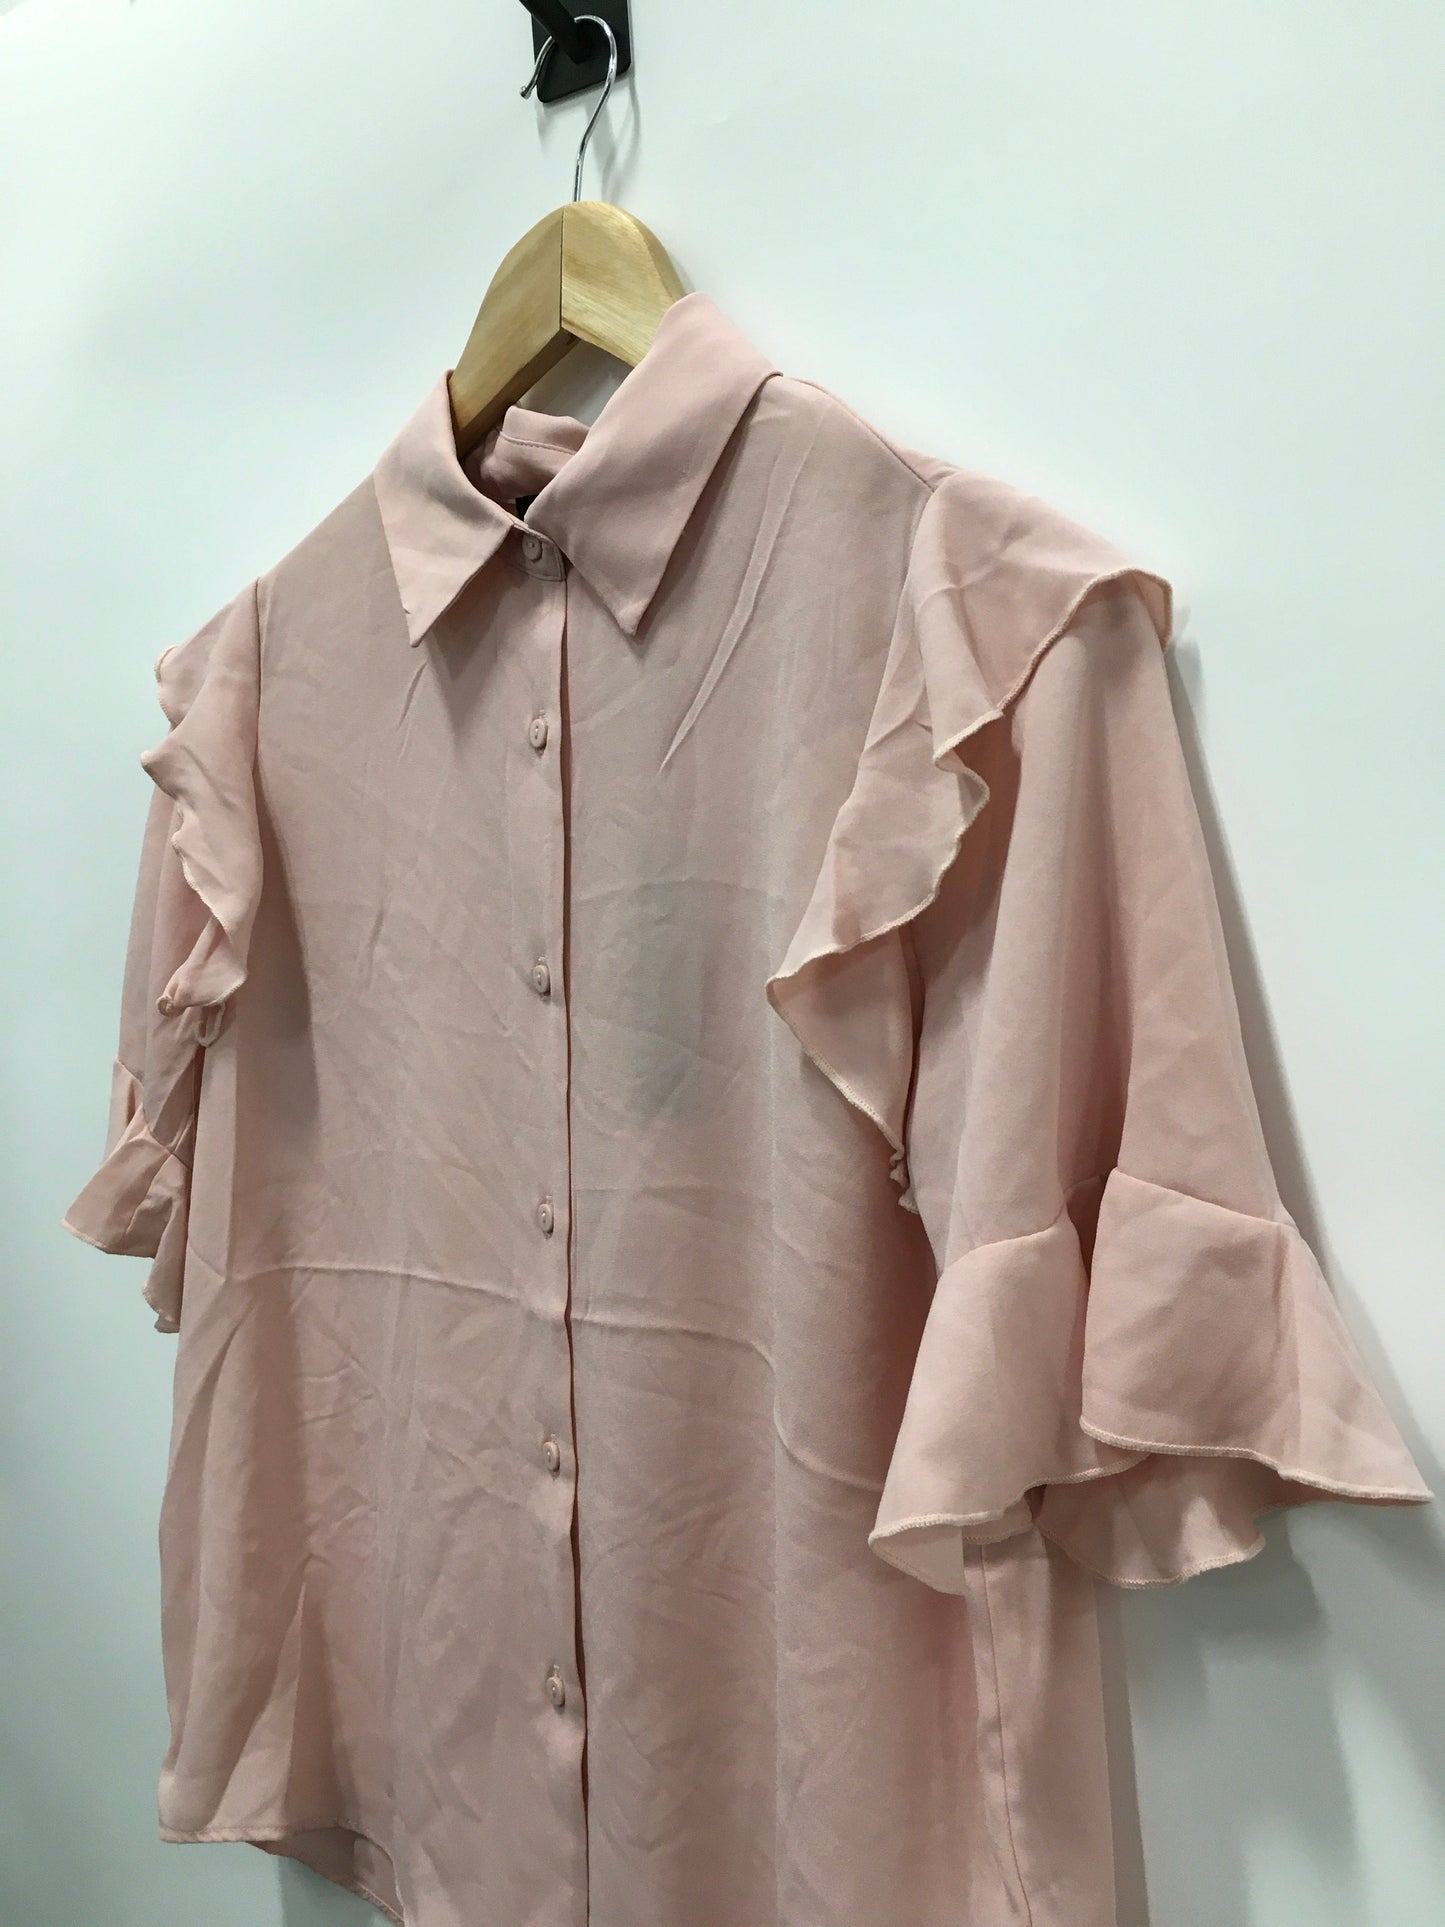 Pink Top Short Sleeve Tahari By Arthur Levine, Size S